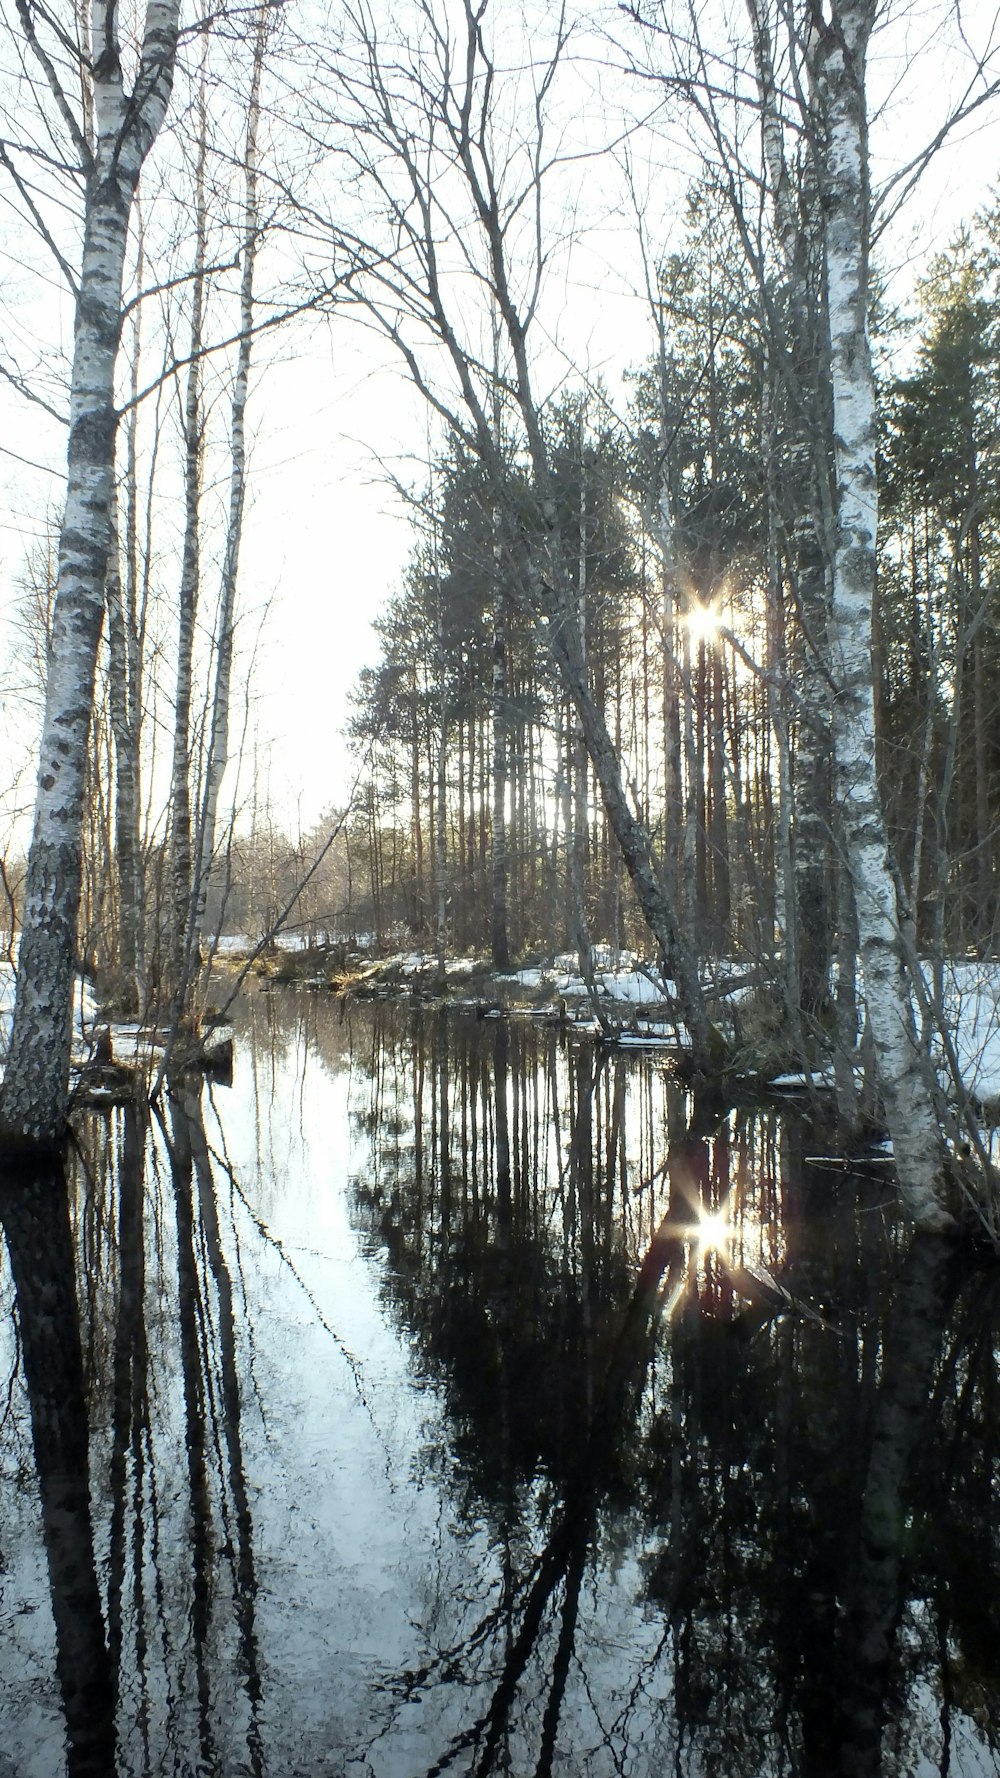 the sun shines through the trees over the water